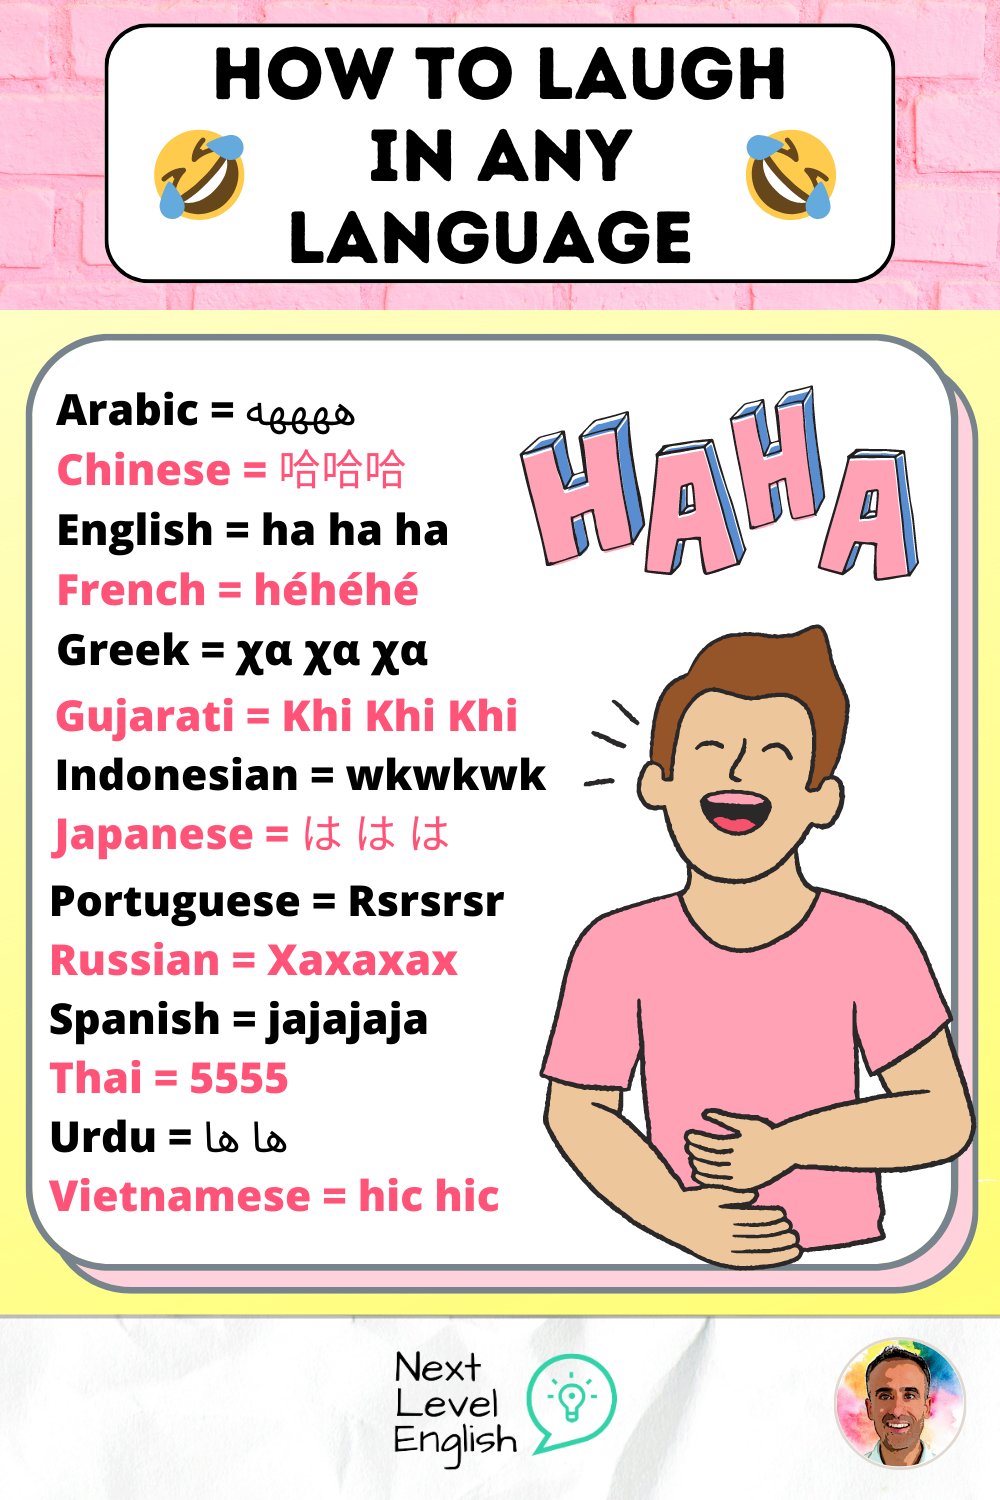 How do you laugh online in your language? #language #languages